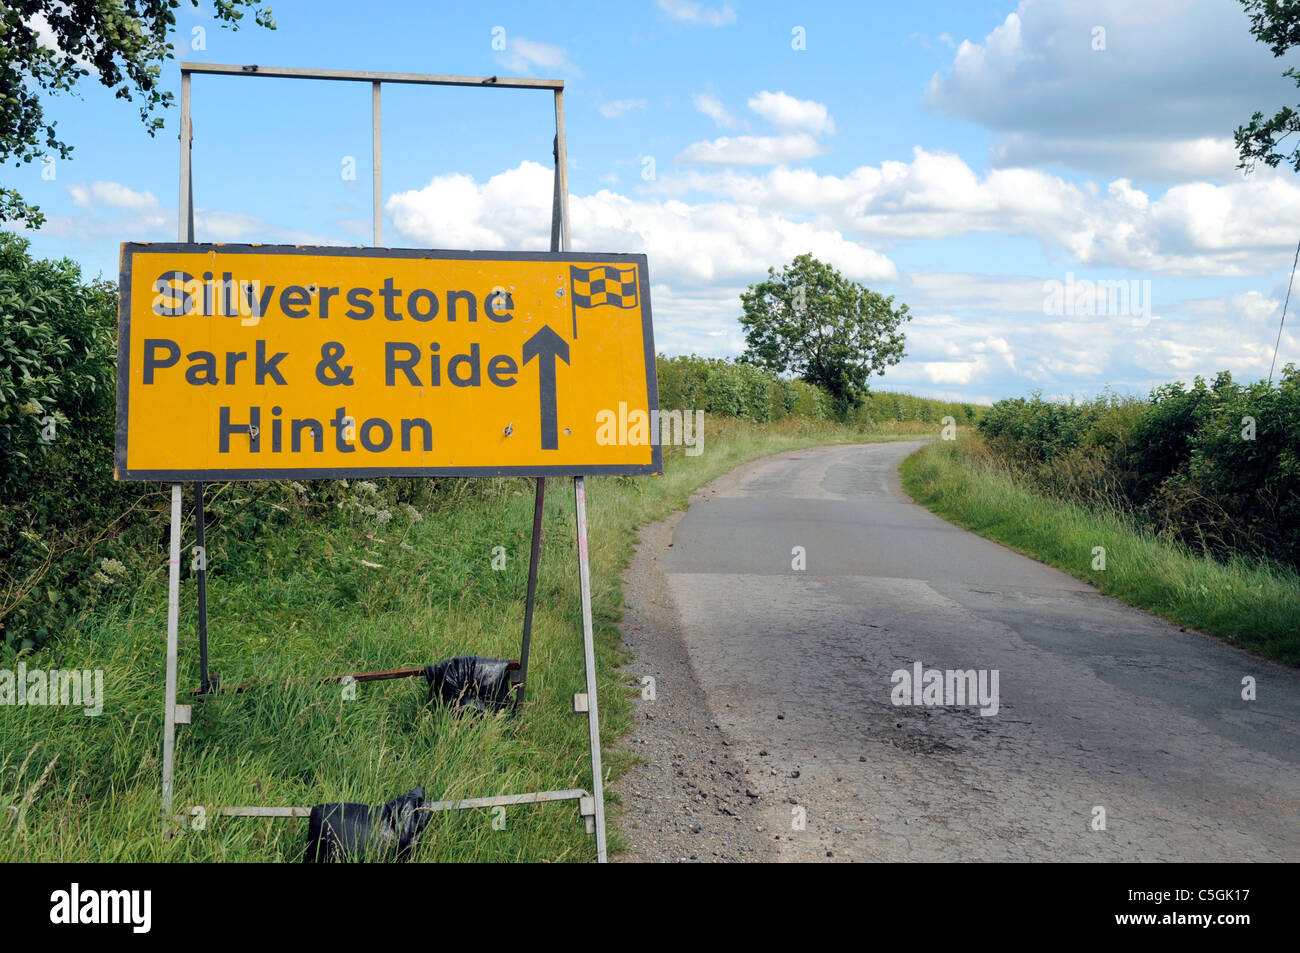 Yellow Road Sign for Silverstone Park and Ride at Hinton ready for Silverstone Grand Prix Stock Photo